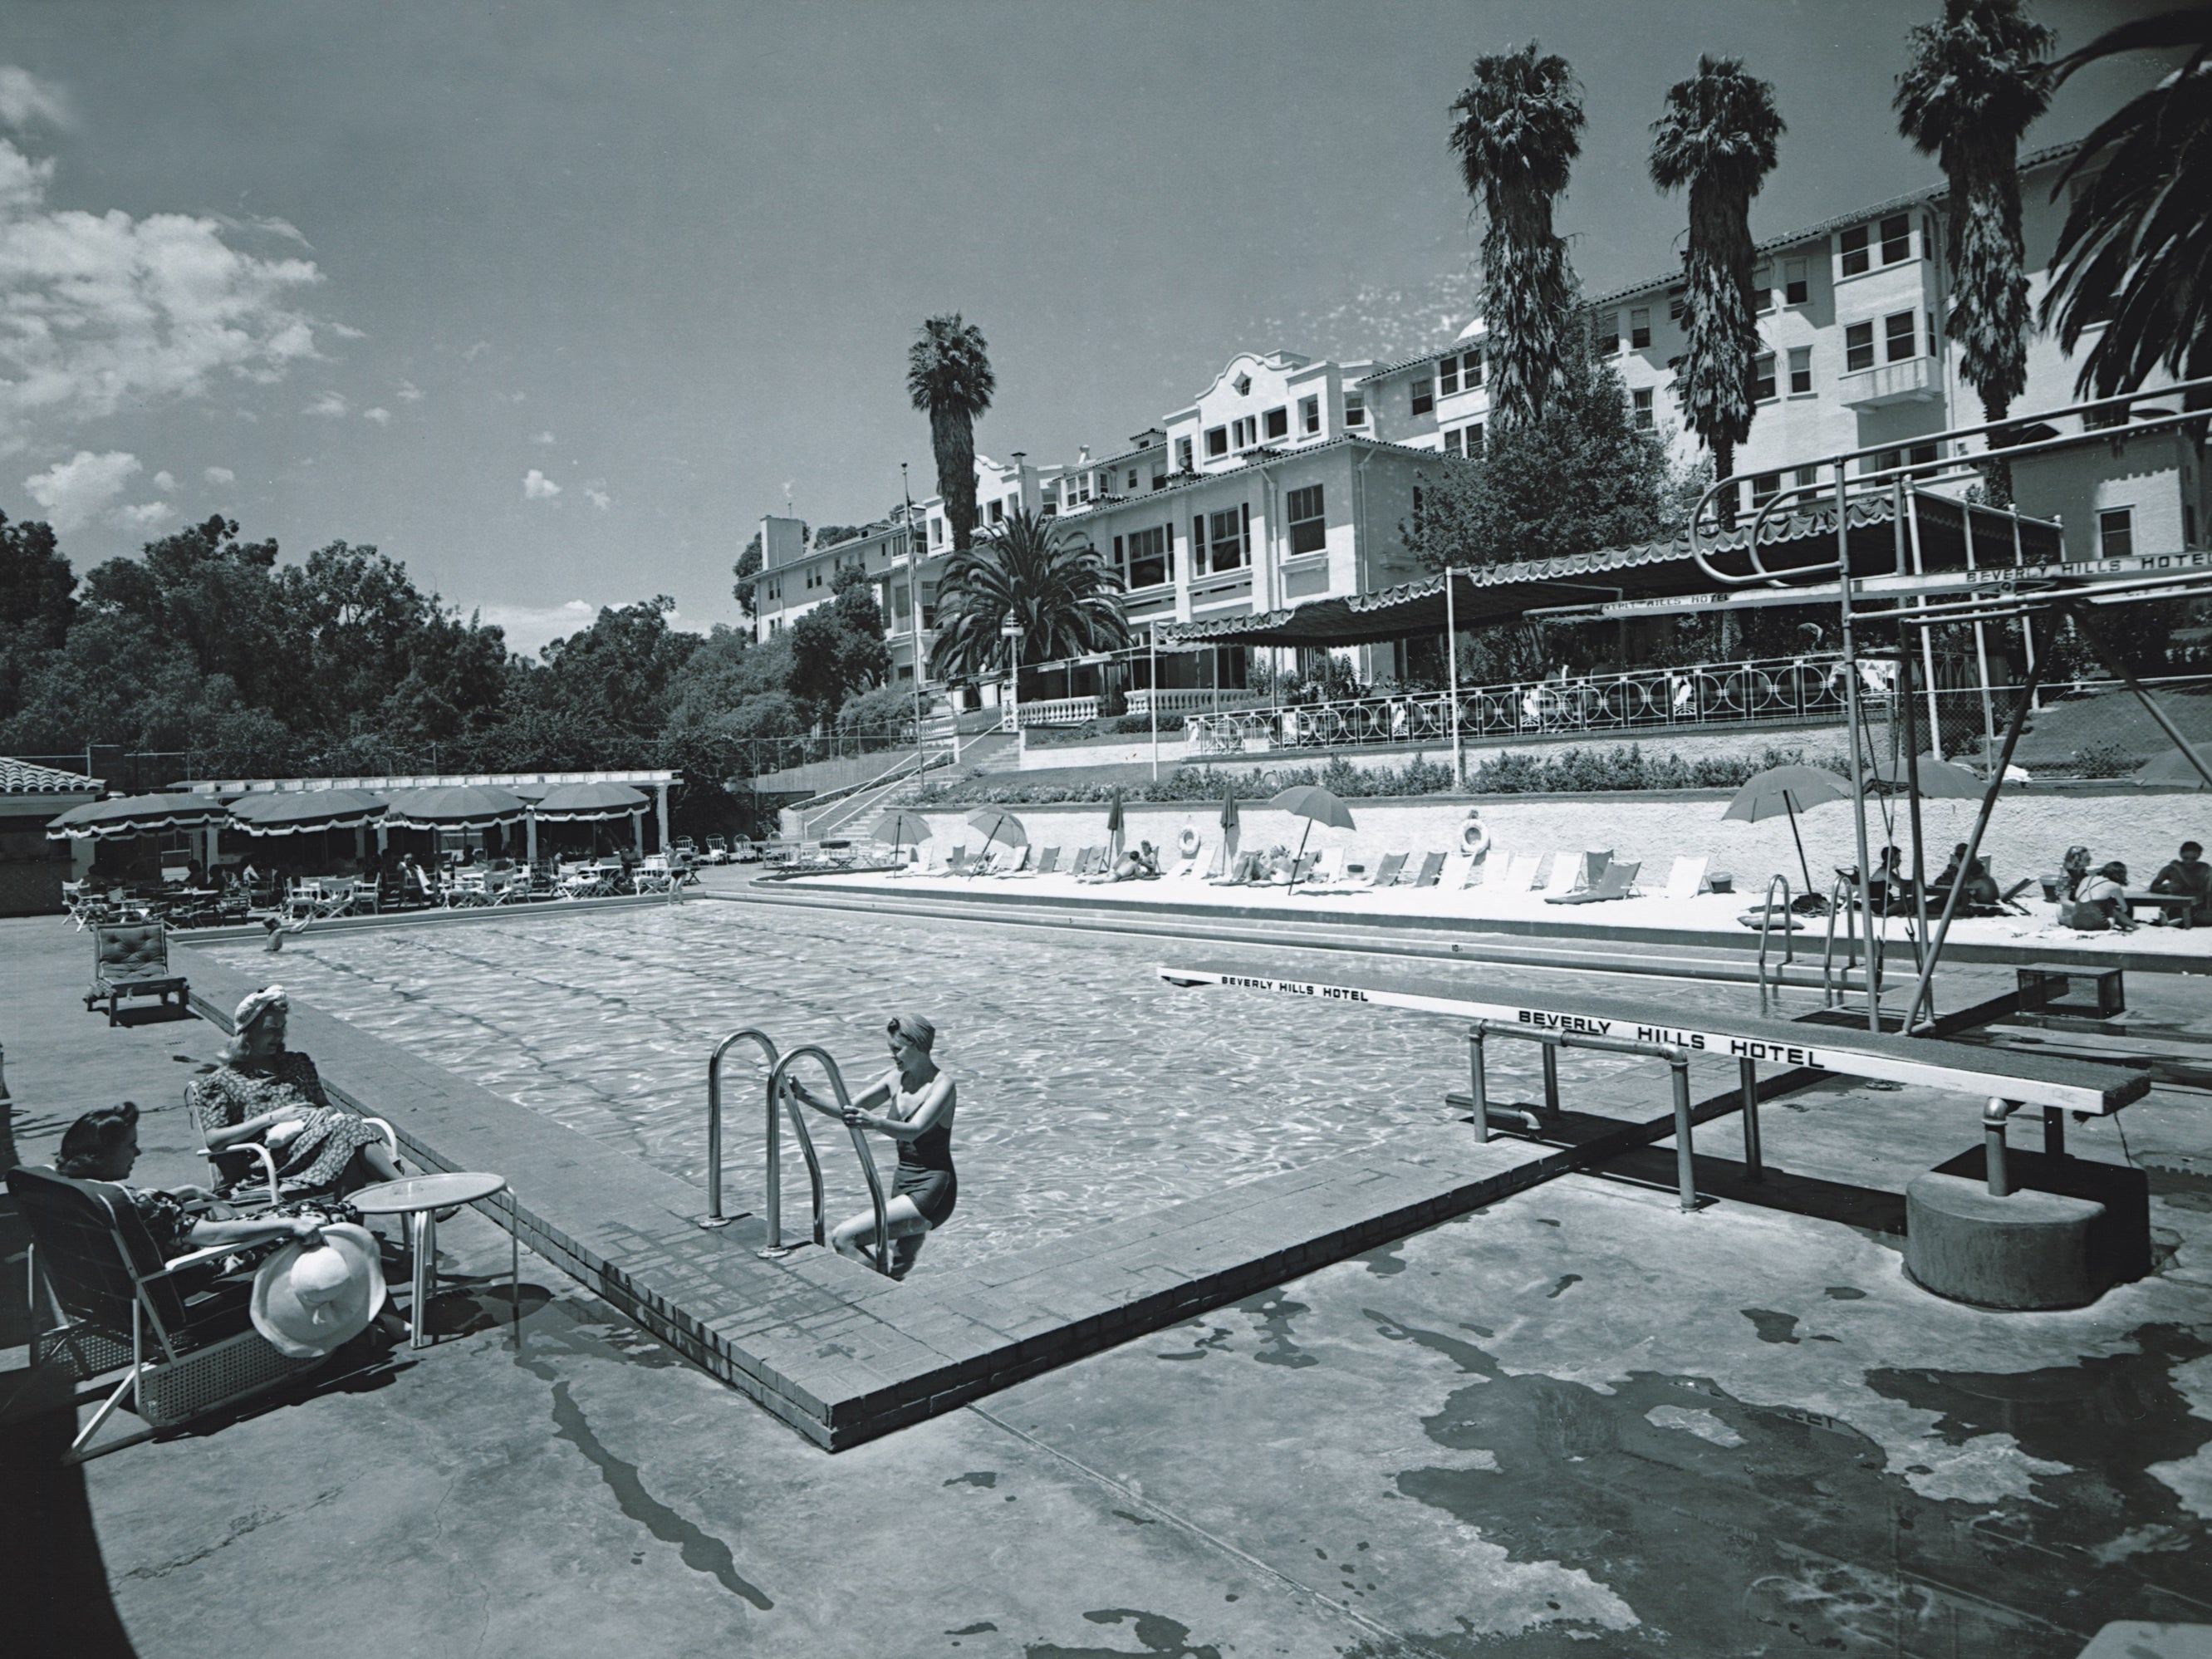 The hotel’s swimming pool, seen here in 1938, was ringed by golden sand shipped in especially from Arizona and has seen its fair share of sensational activity